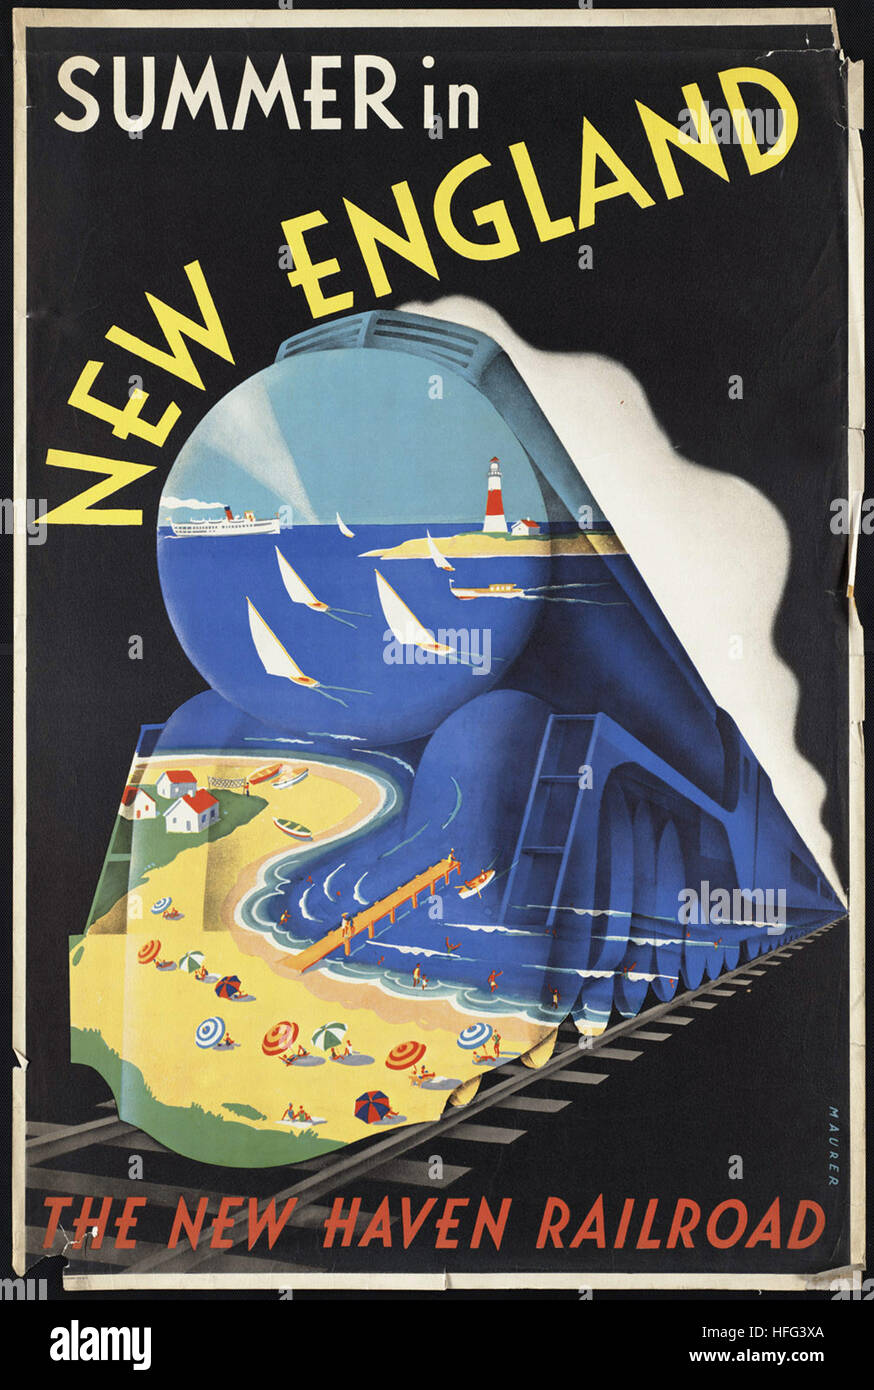 Vintage Travel Poster - Summer in New England Stock Photo